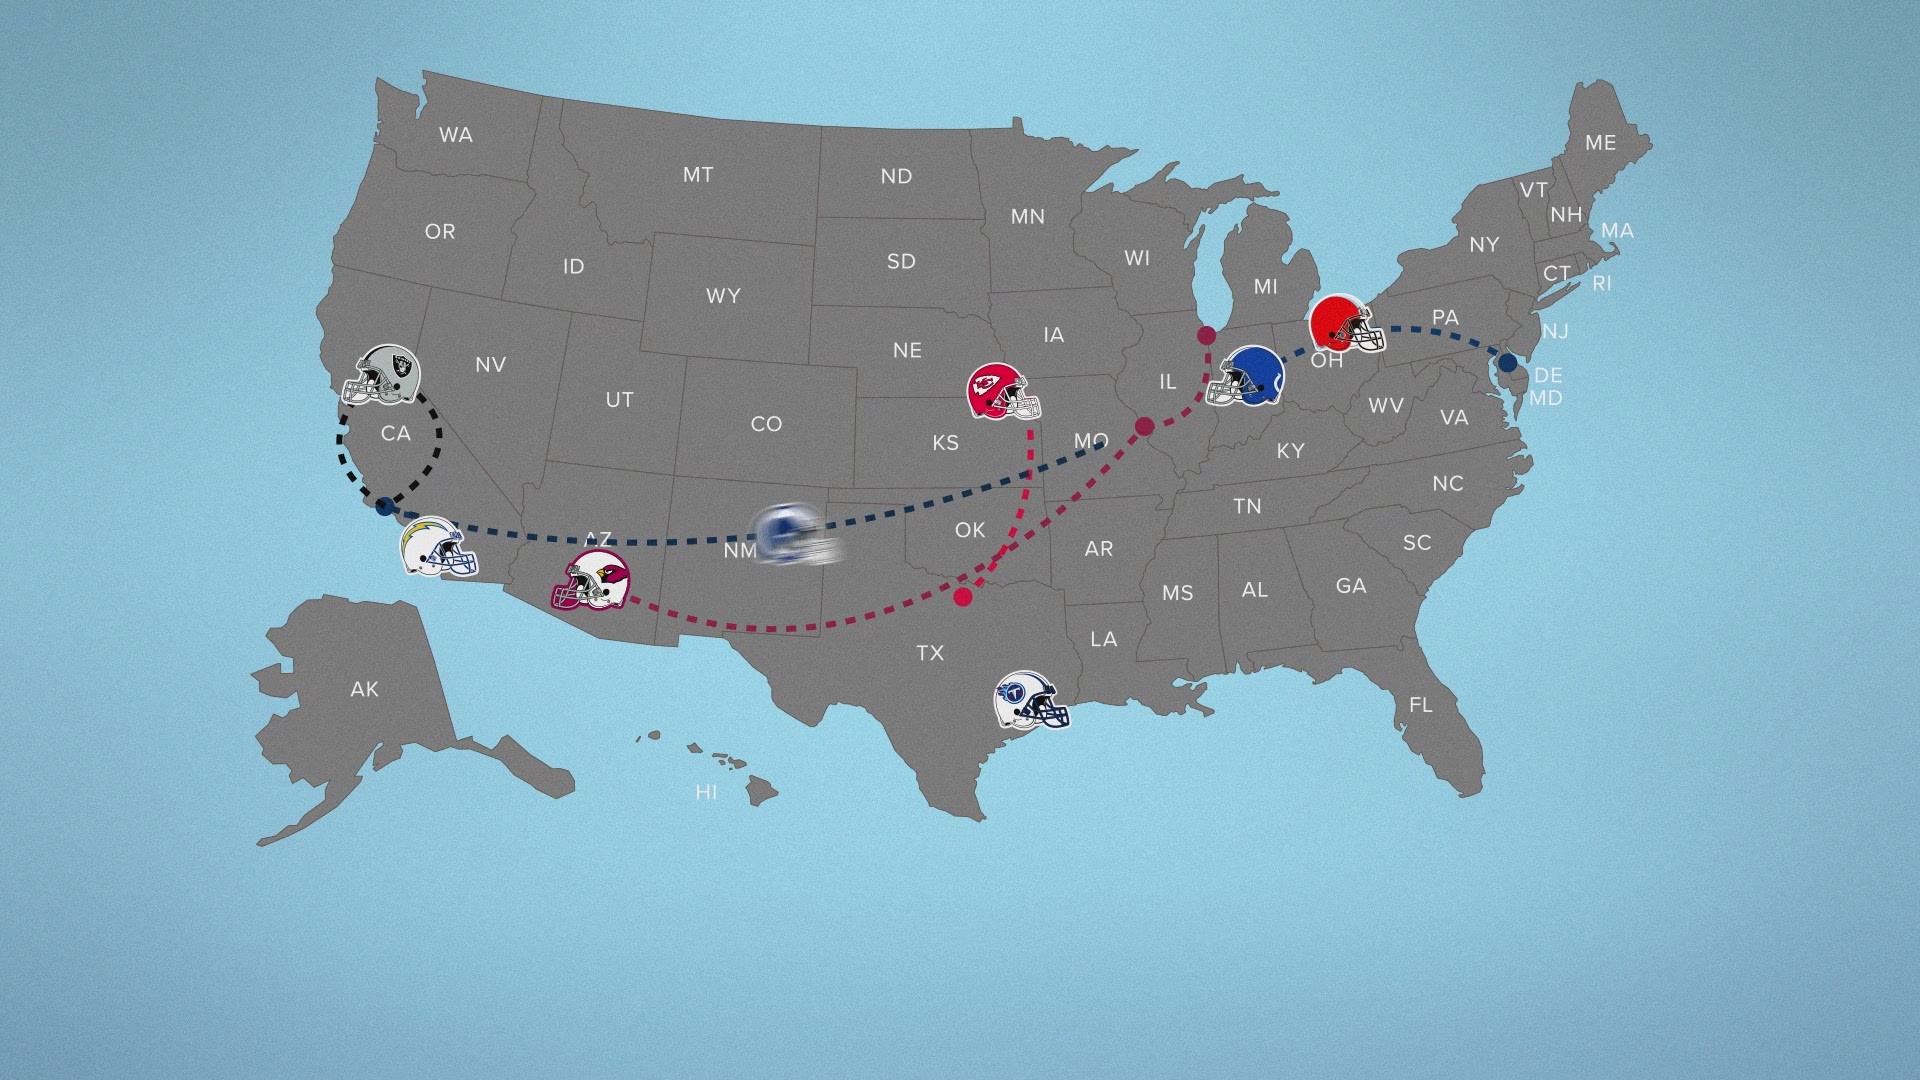 13 pro football teams have moved since 1960. Here's where they went.